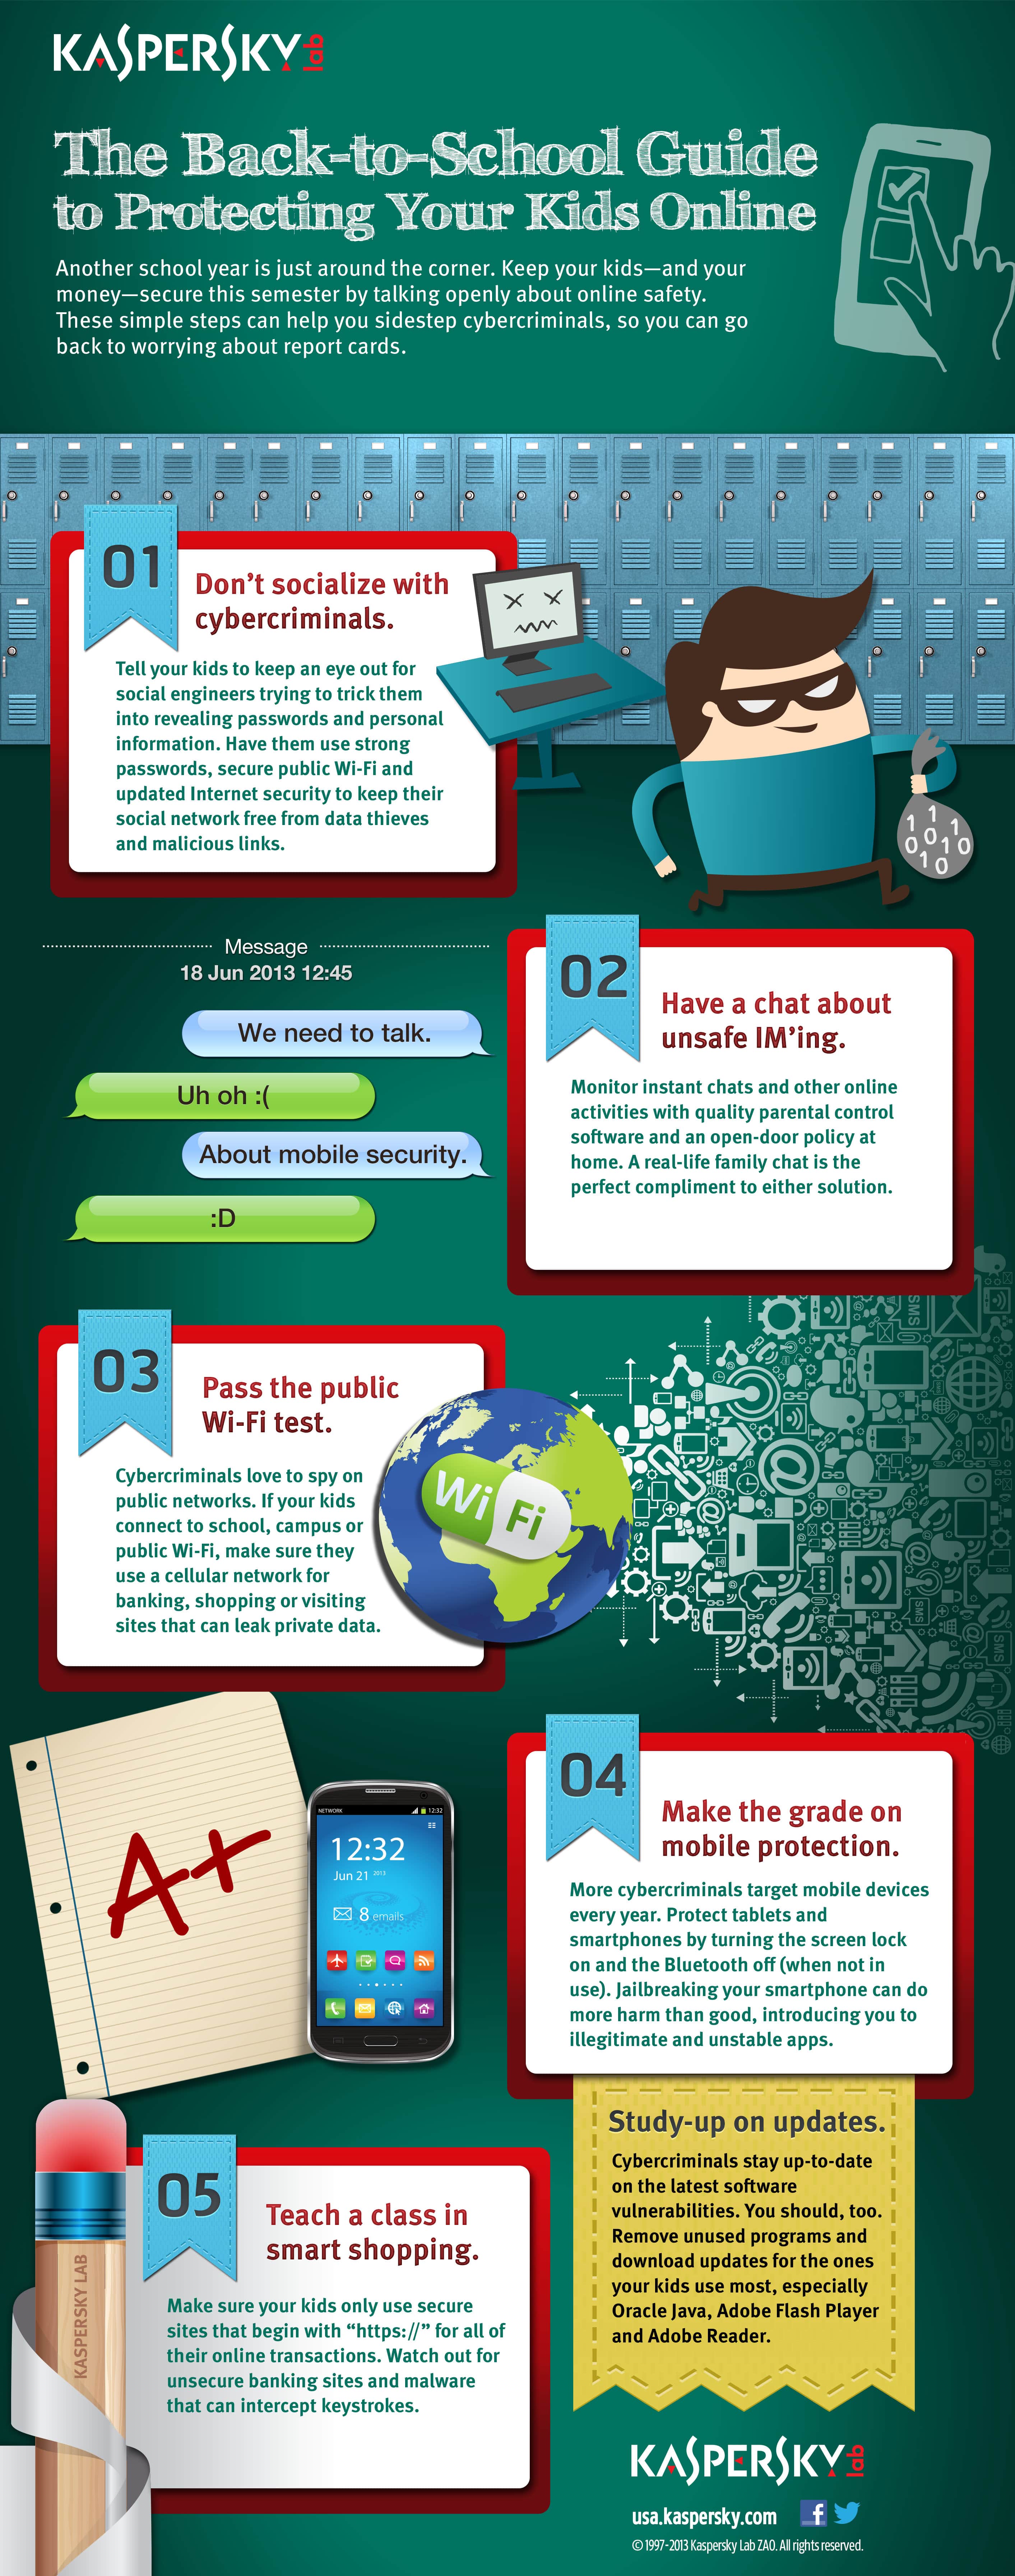 content/en-in/images/repository/isc/infographic-back-to-school-guide_0.jpg